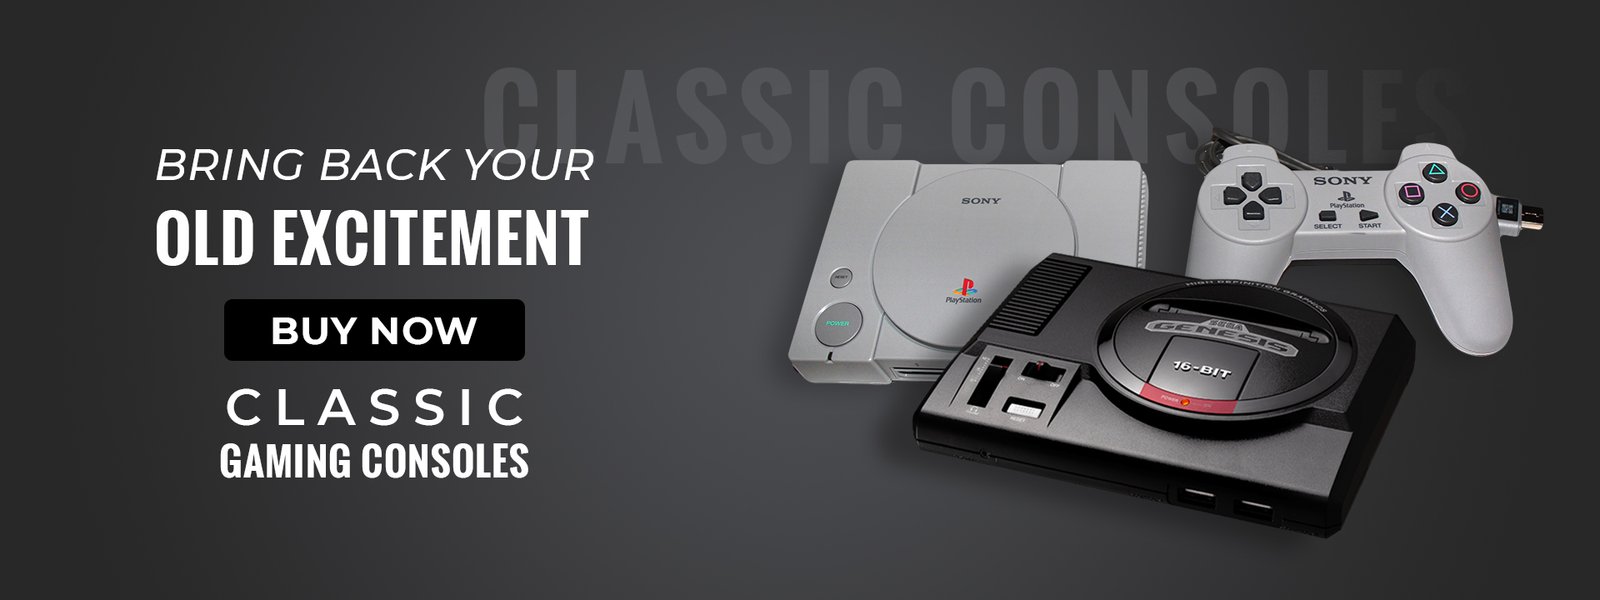 Sony Playstation Banner